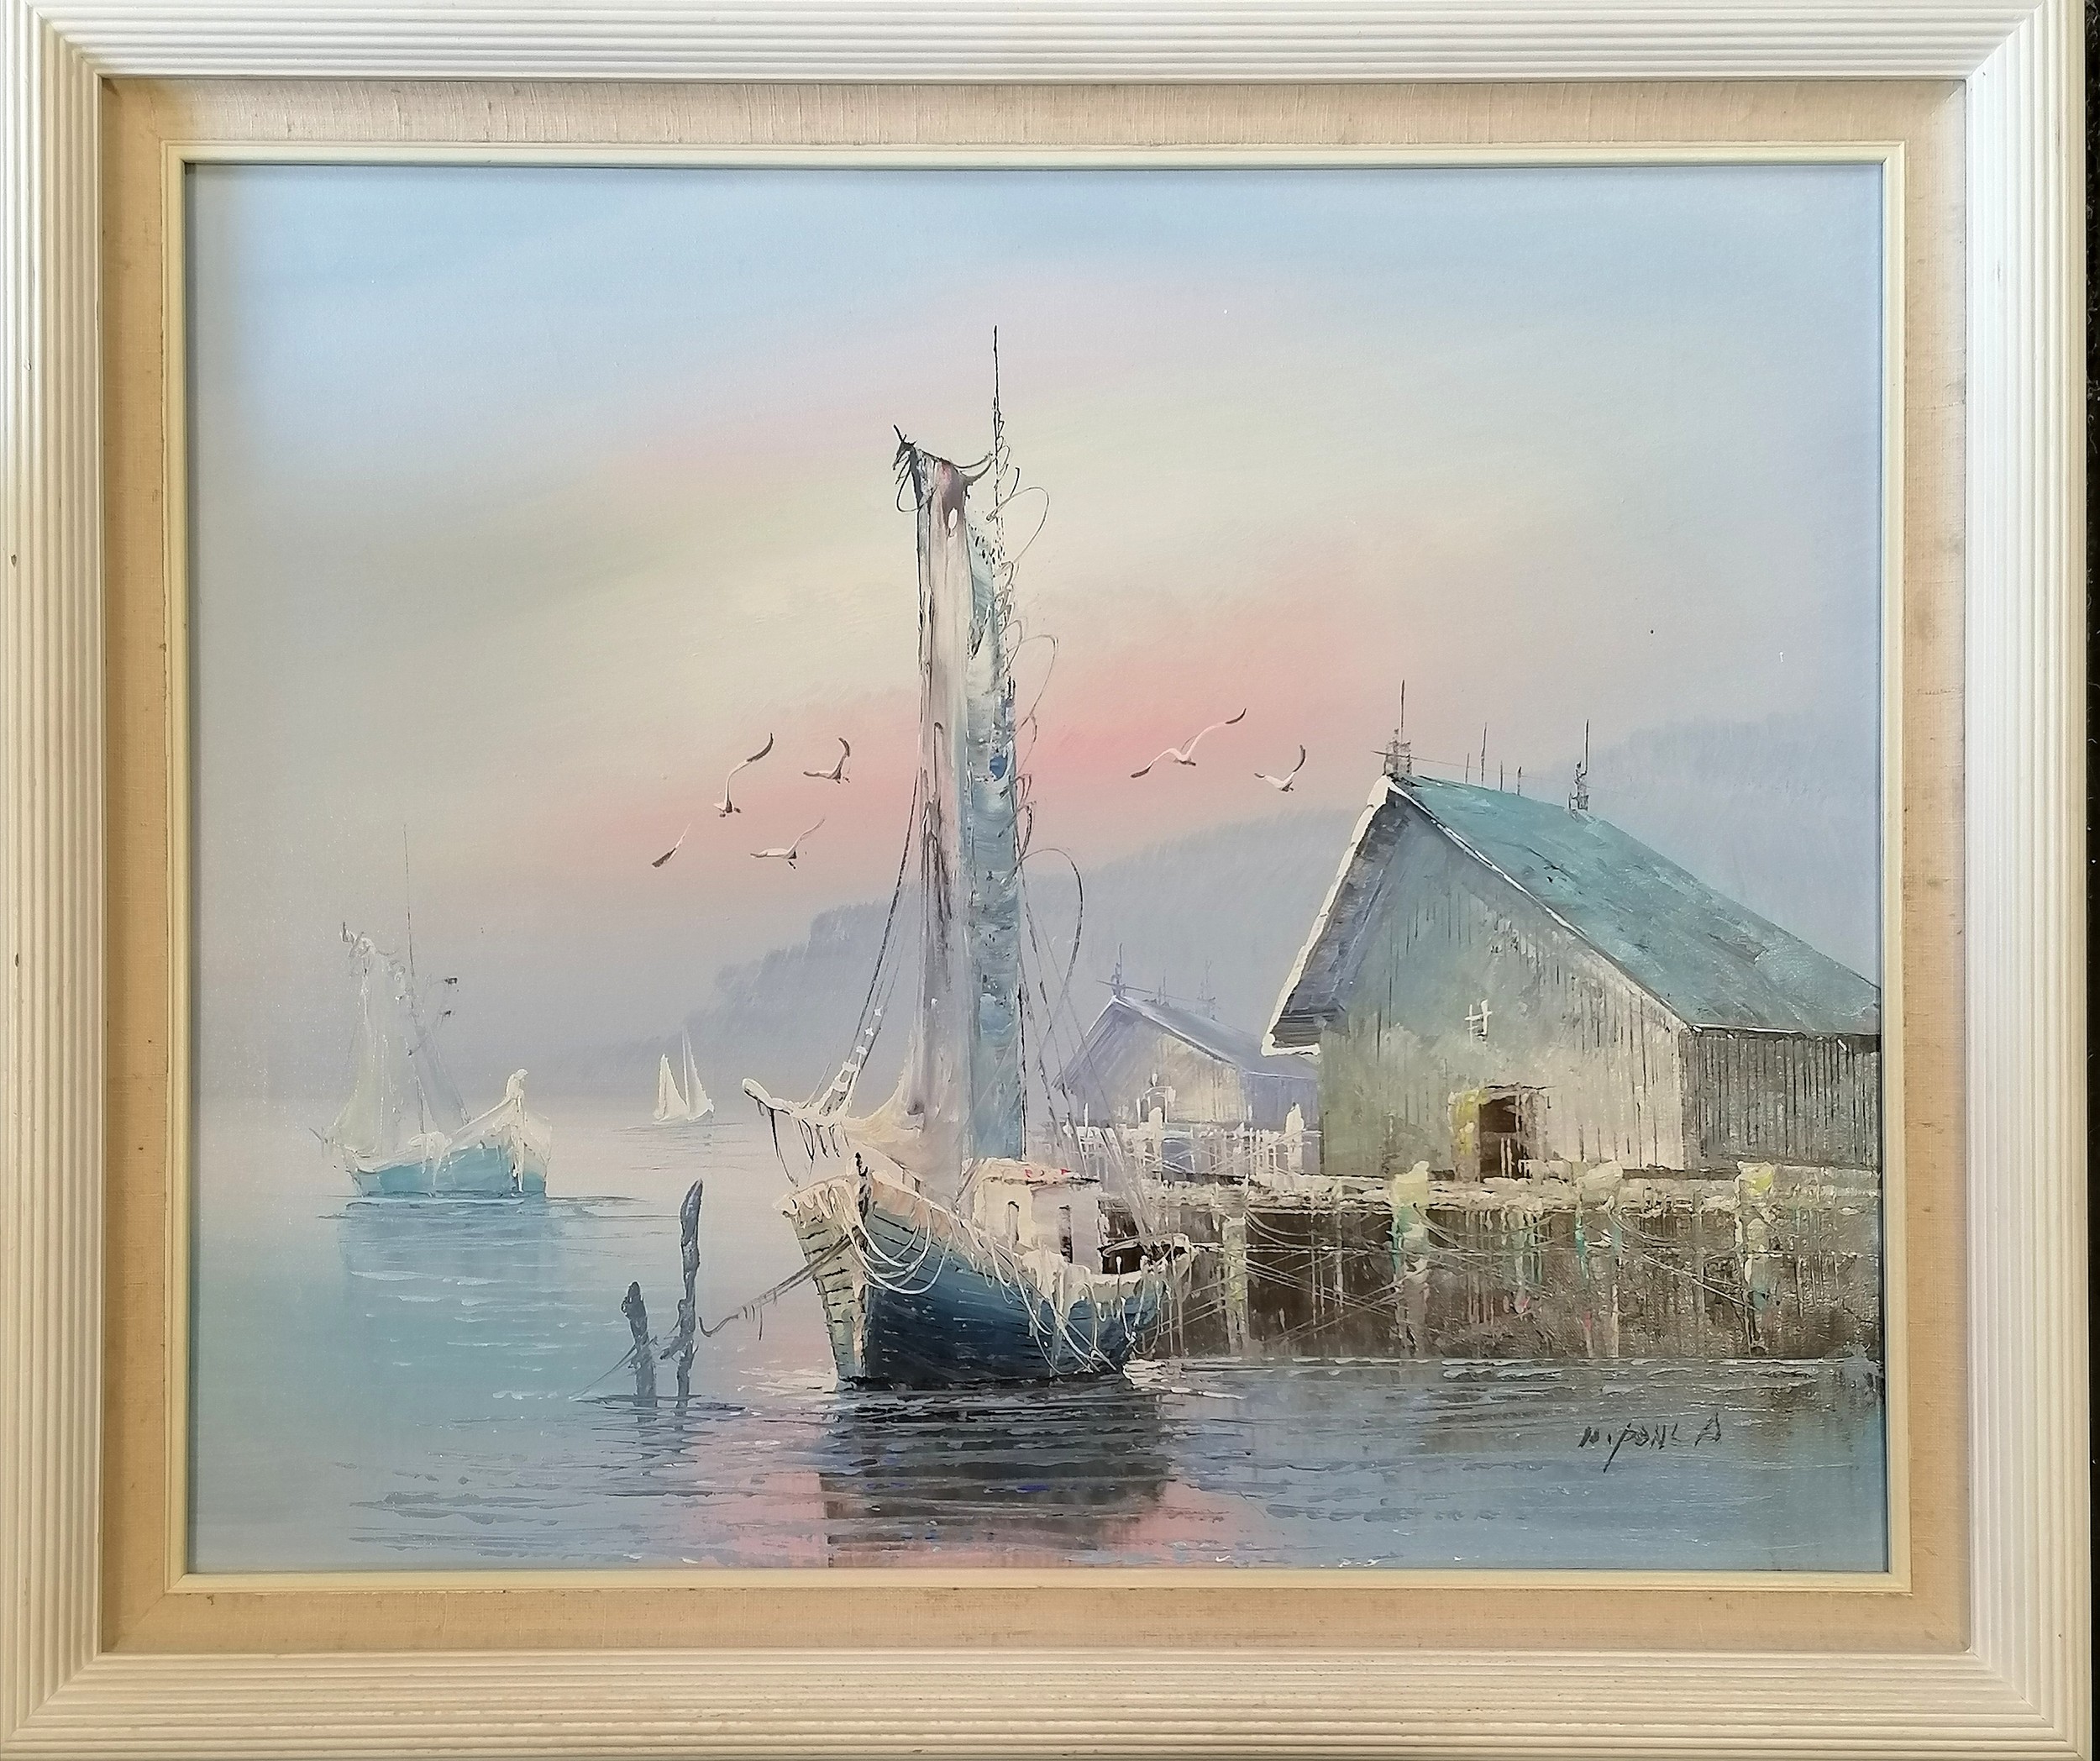 Signed oil painting on canvas of a fishing boat moored at quay - frame 62.5cm x 72.5cm